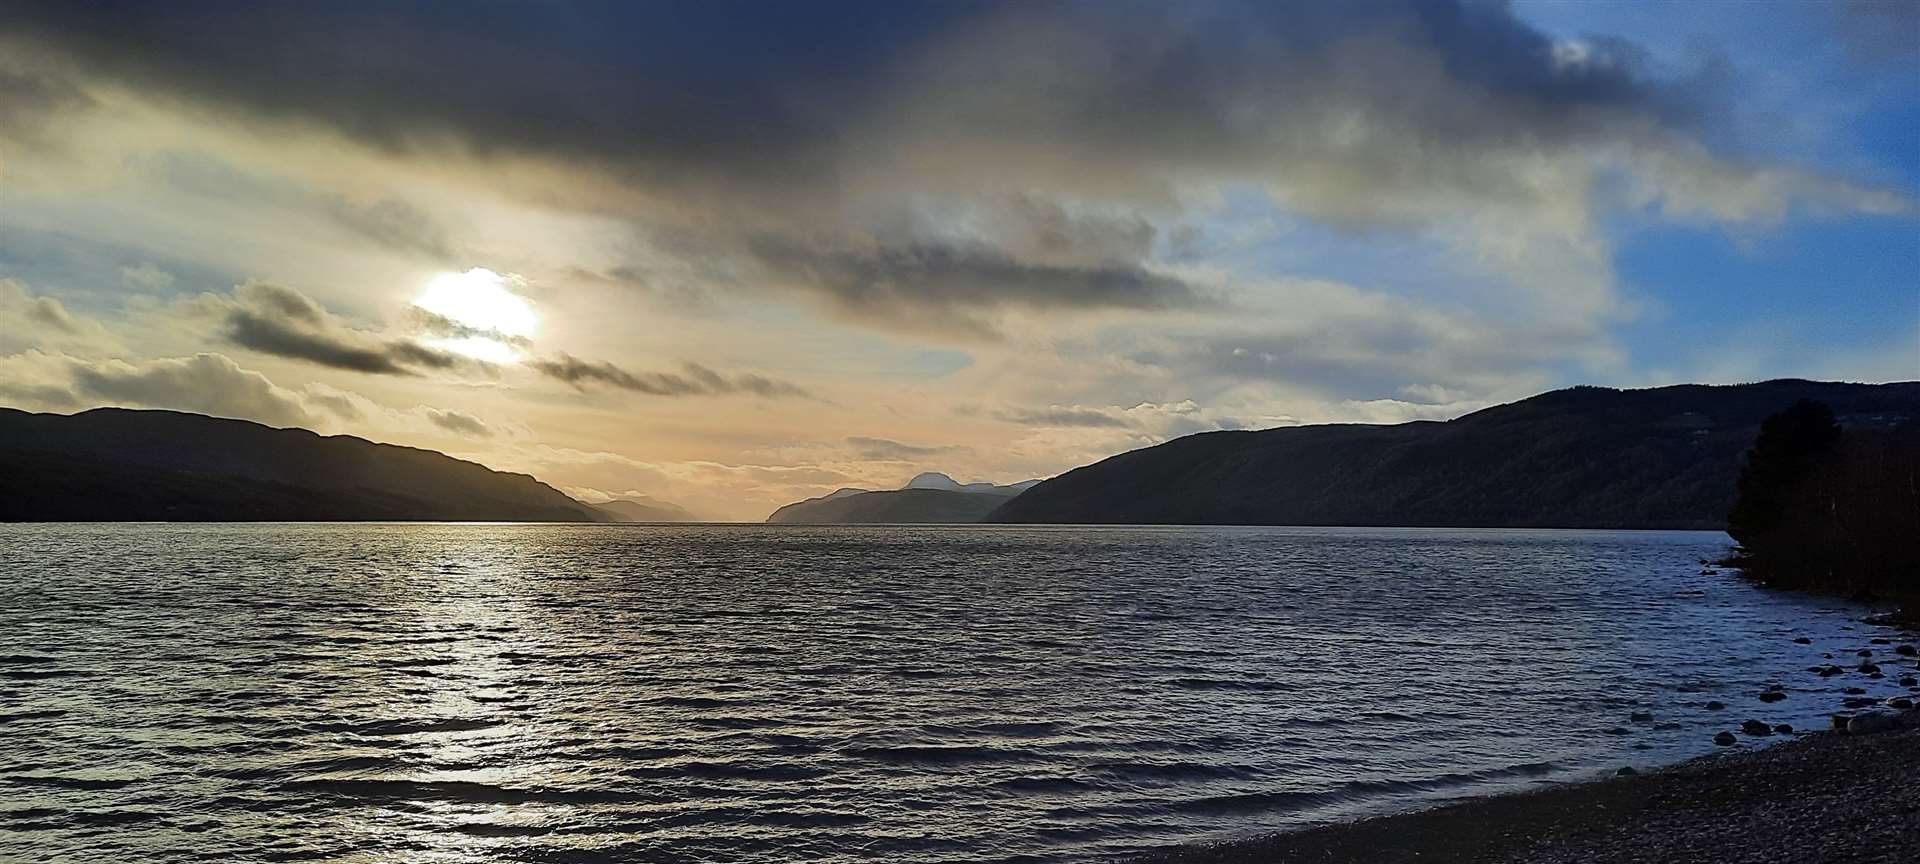 The view down Loch Ness from the beach.